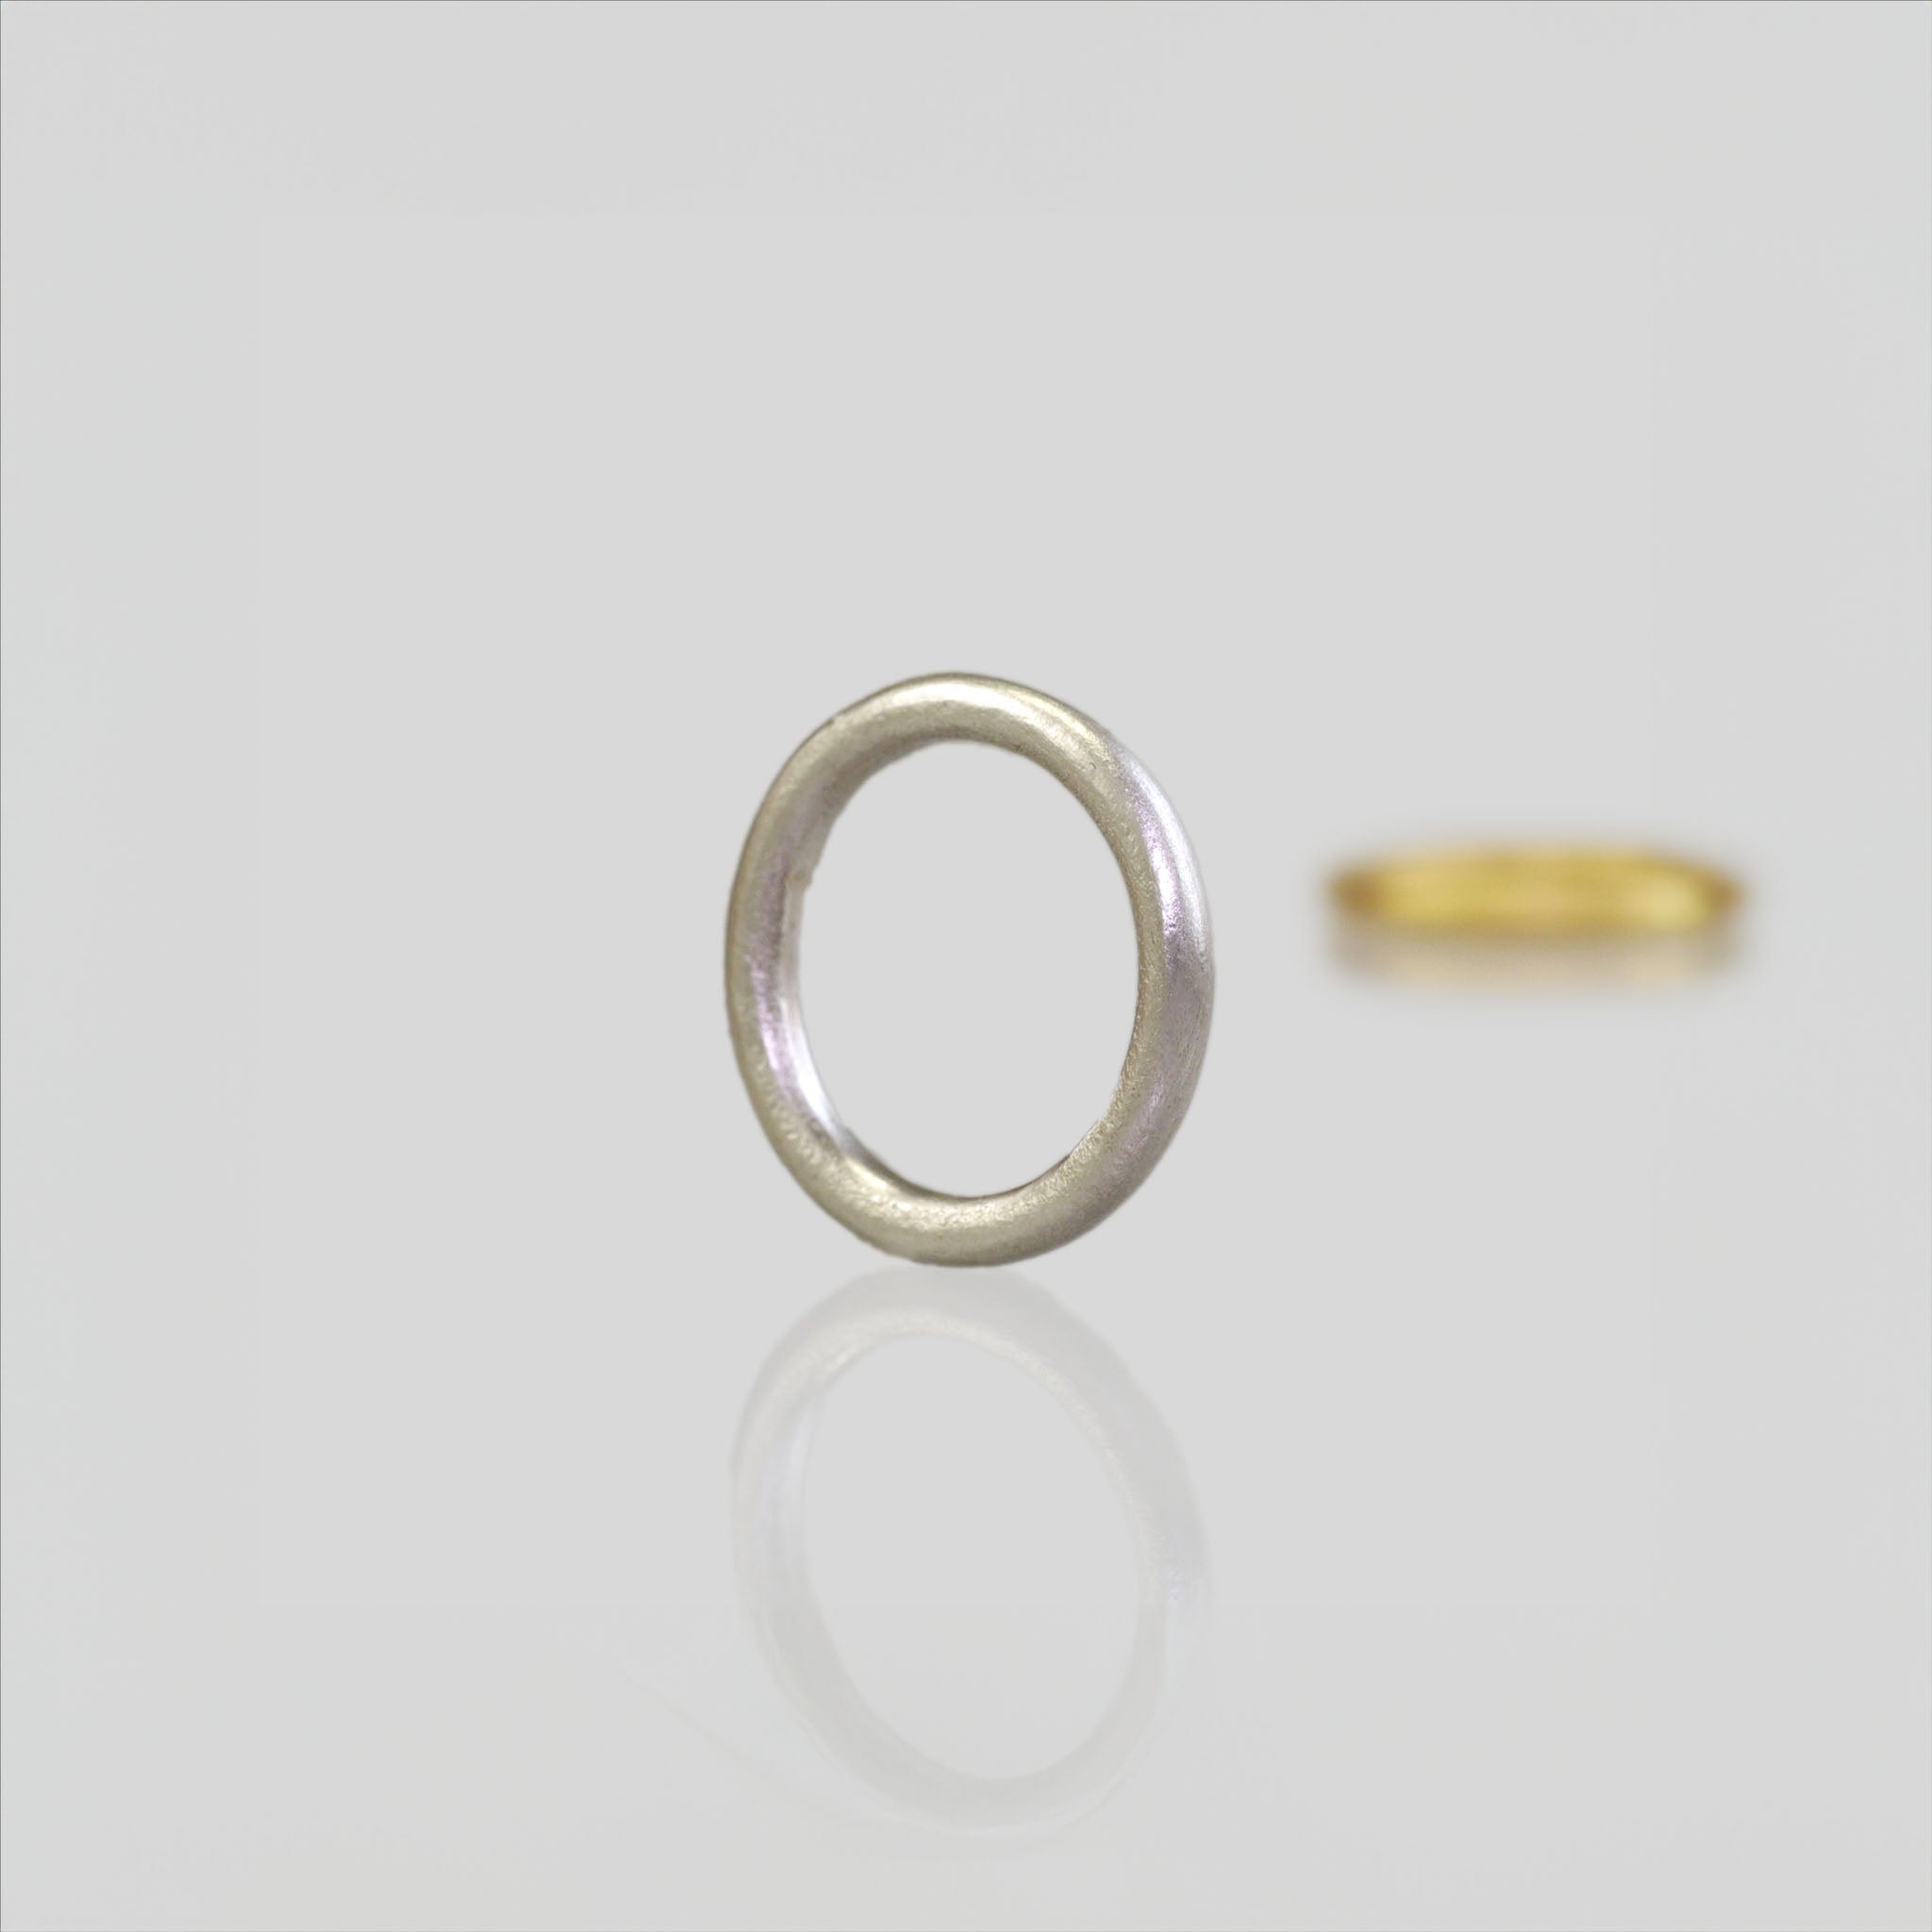 Round profile White Gold wedding ring with minimalist design, perfect for your special occasion.